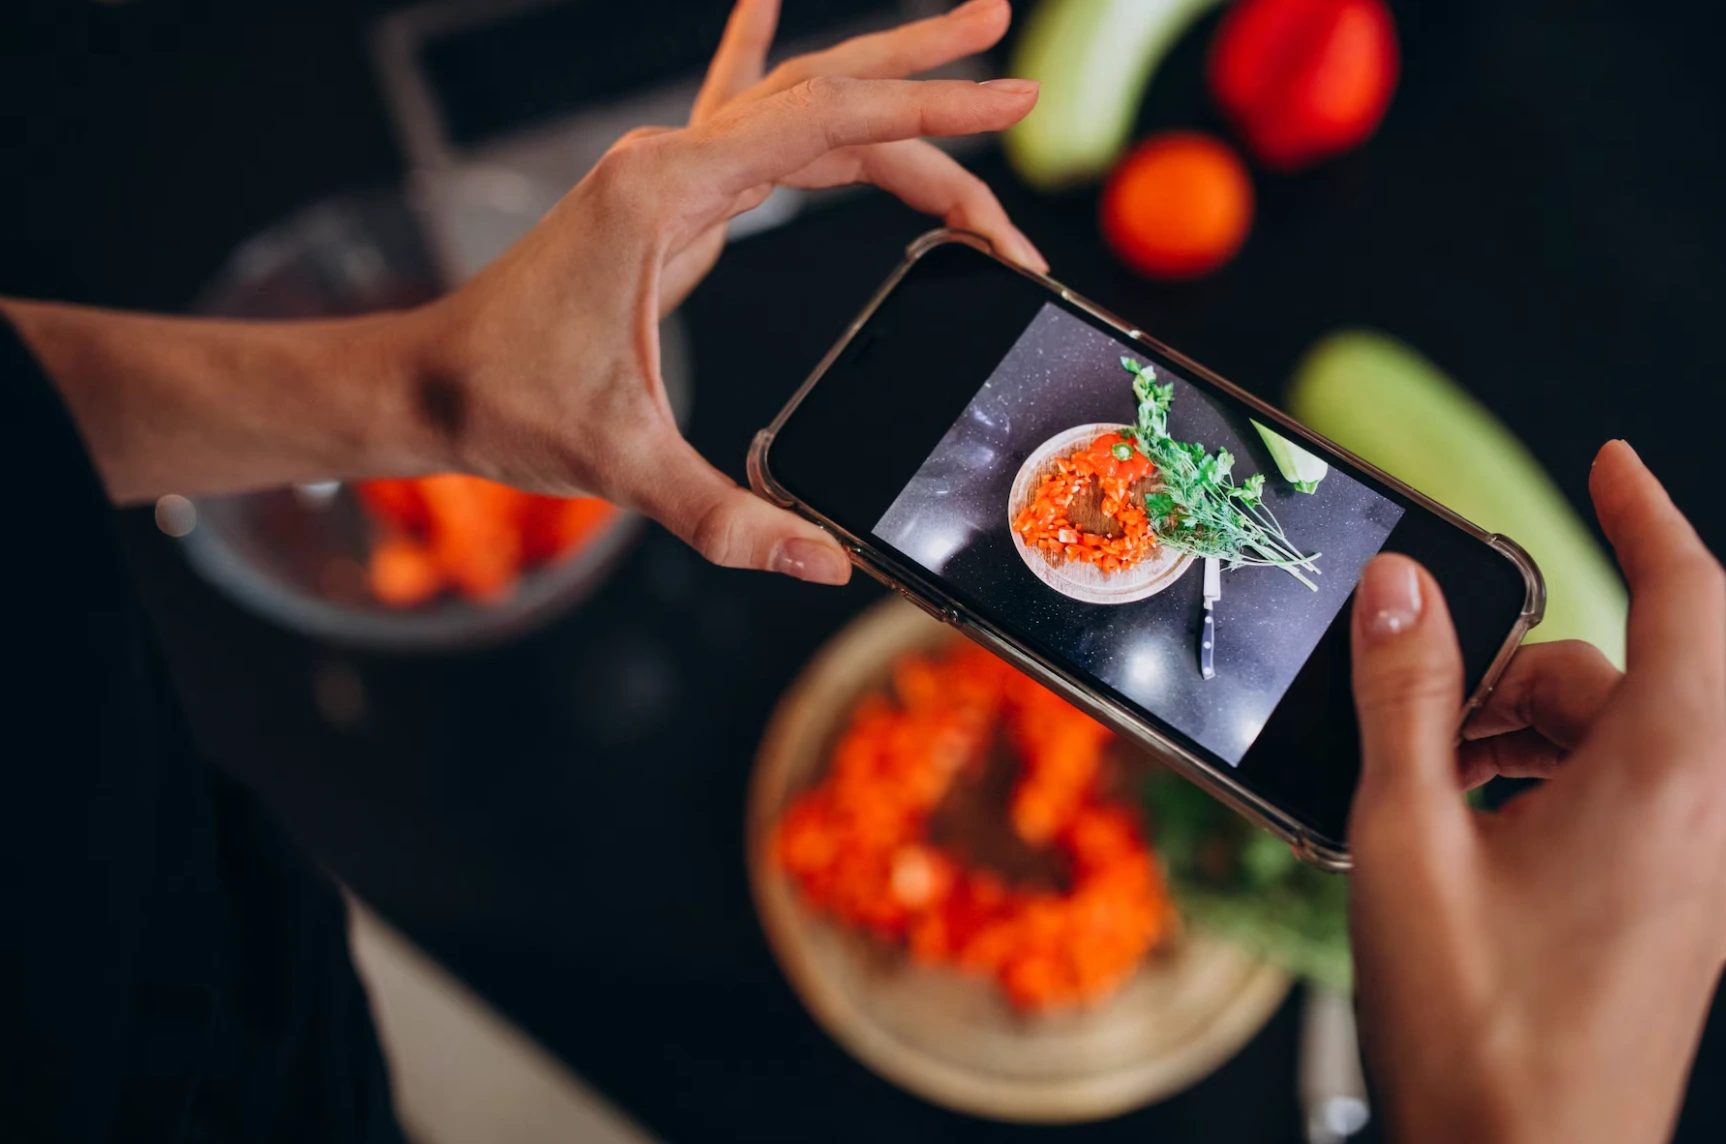 who are restaurant influencers?